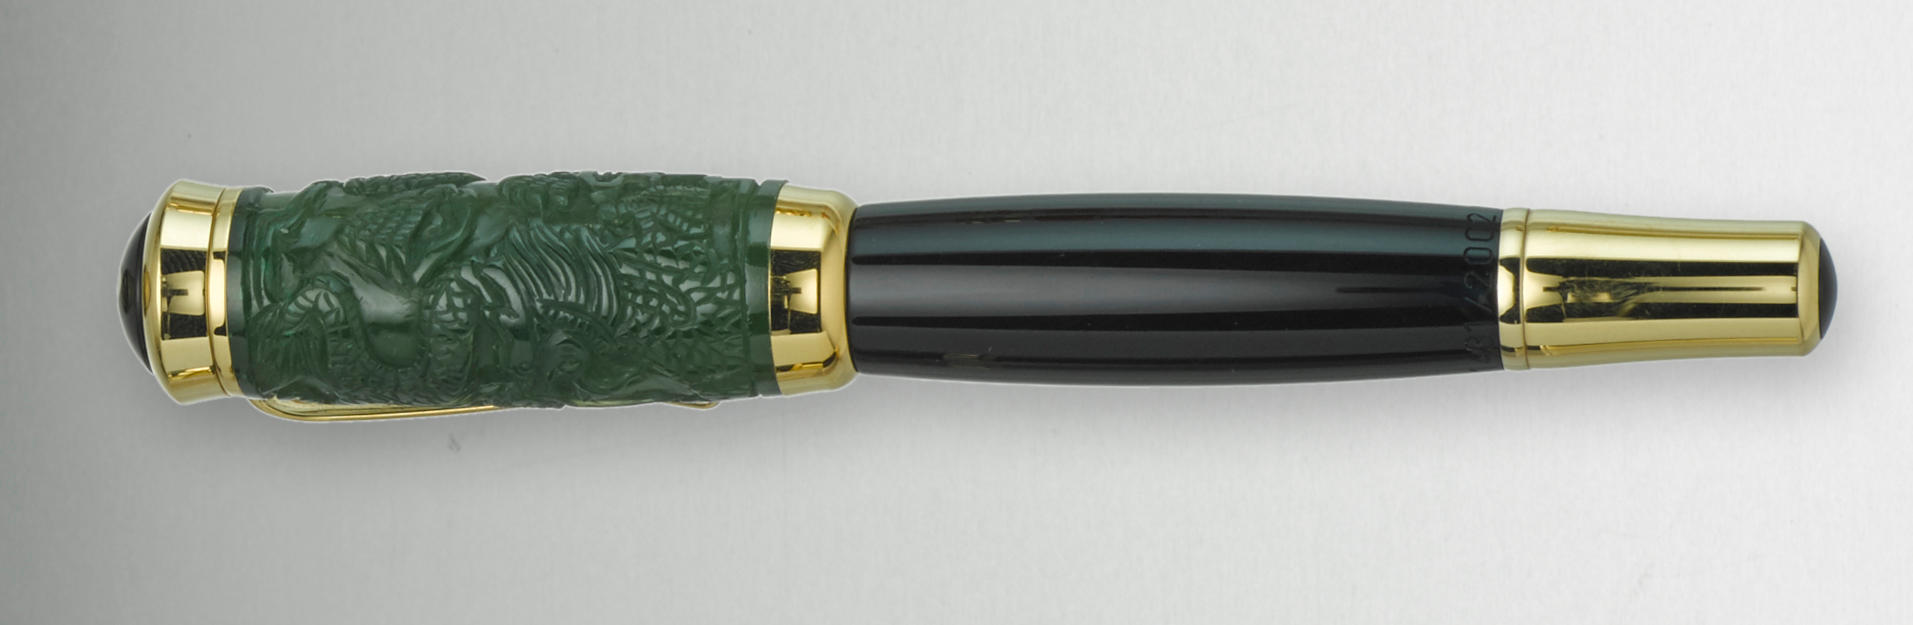 MONTBLANC: Qing Dynasty Jade Limited Edition 2002 Fountain Pen